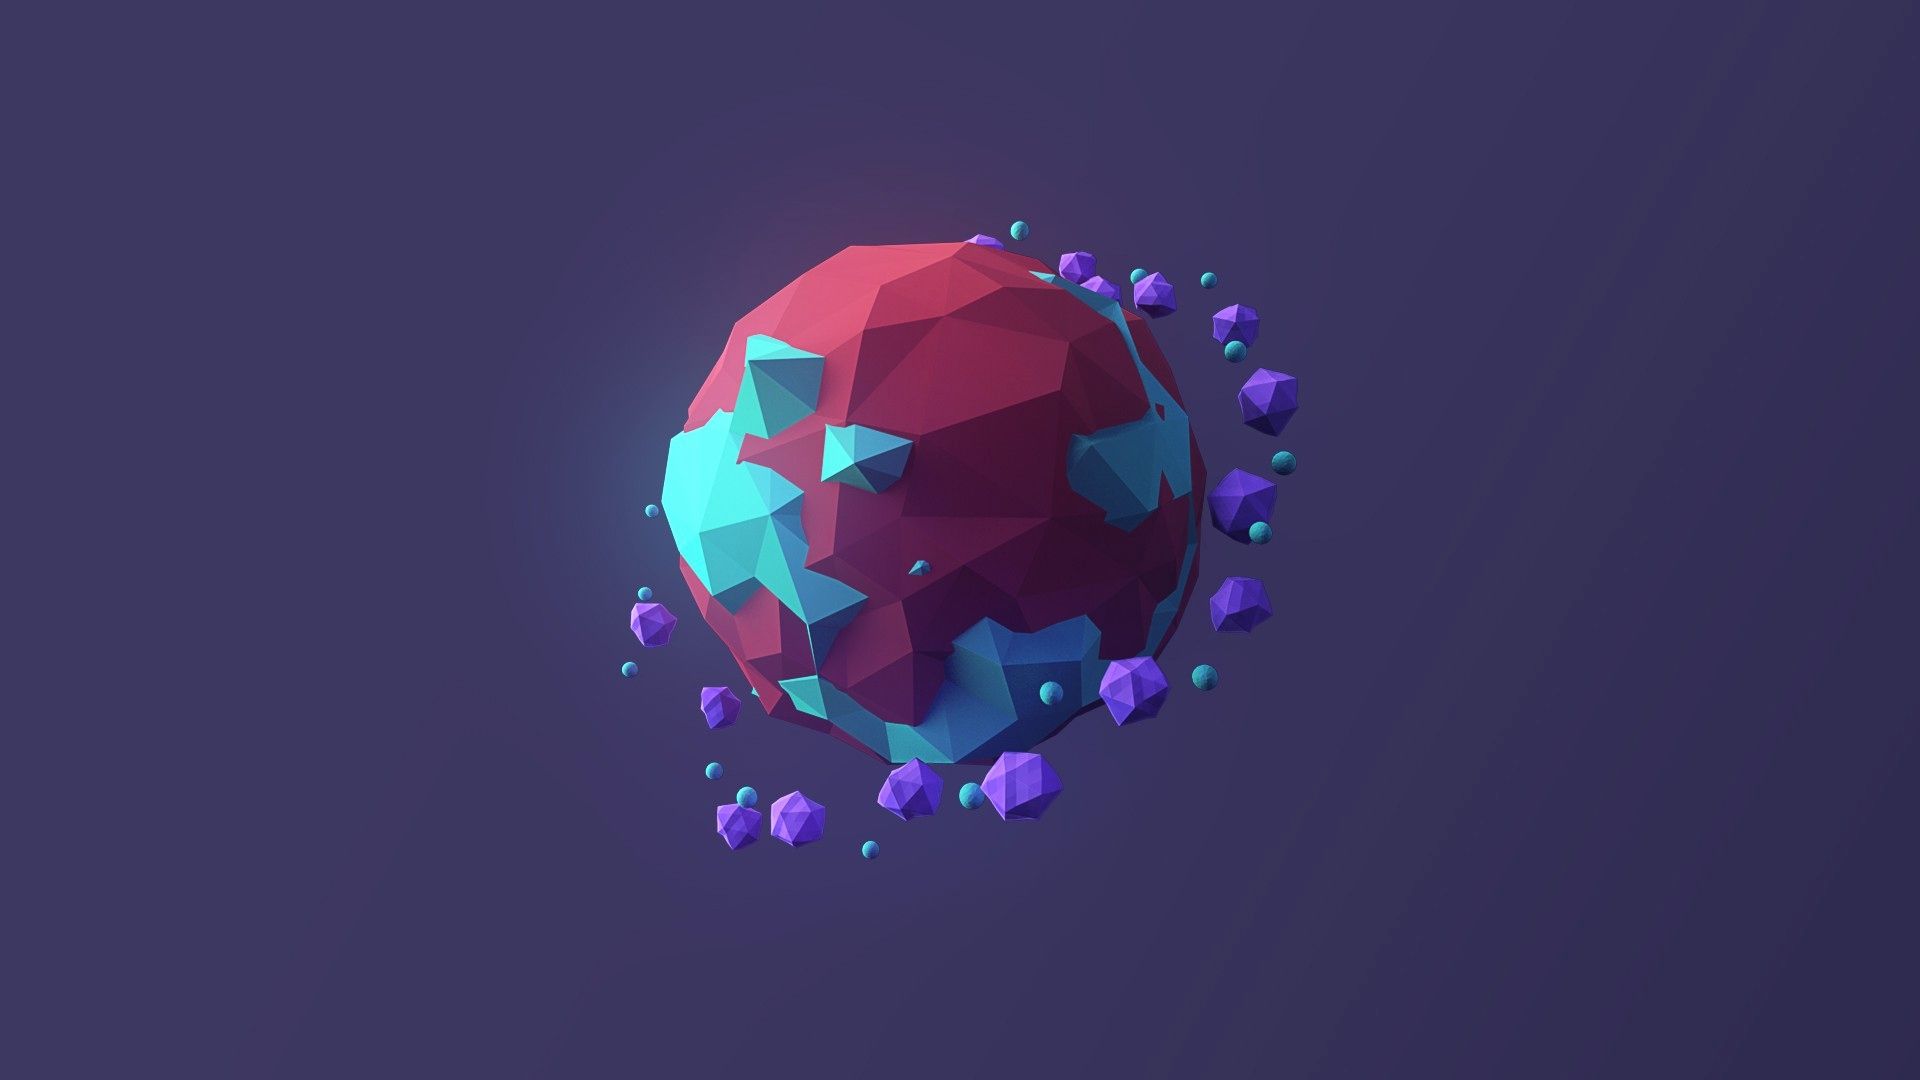 Low Poly Wallpaper 1920x1080 Best Of Low Poly Wallpaper